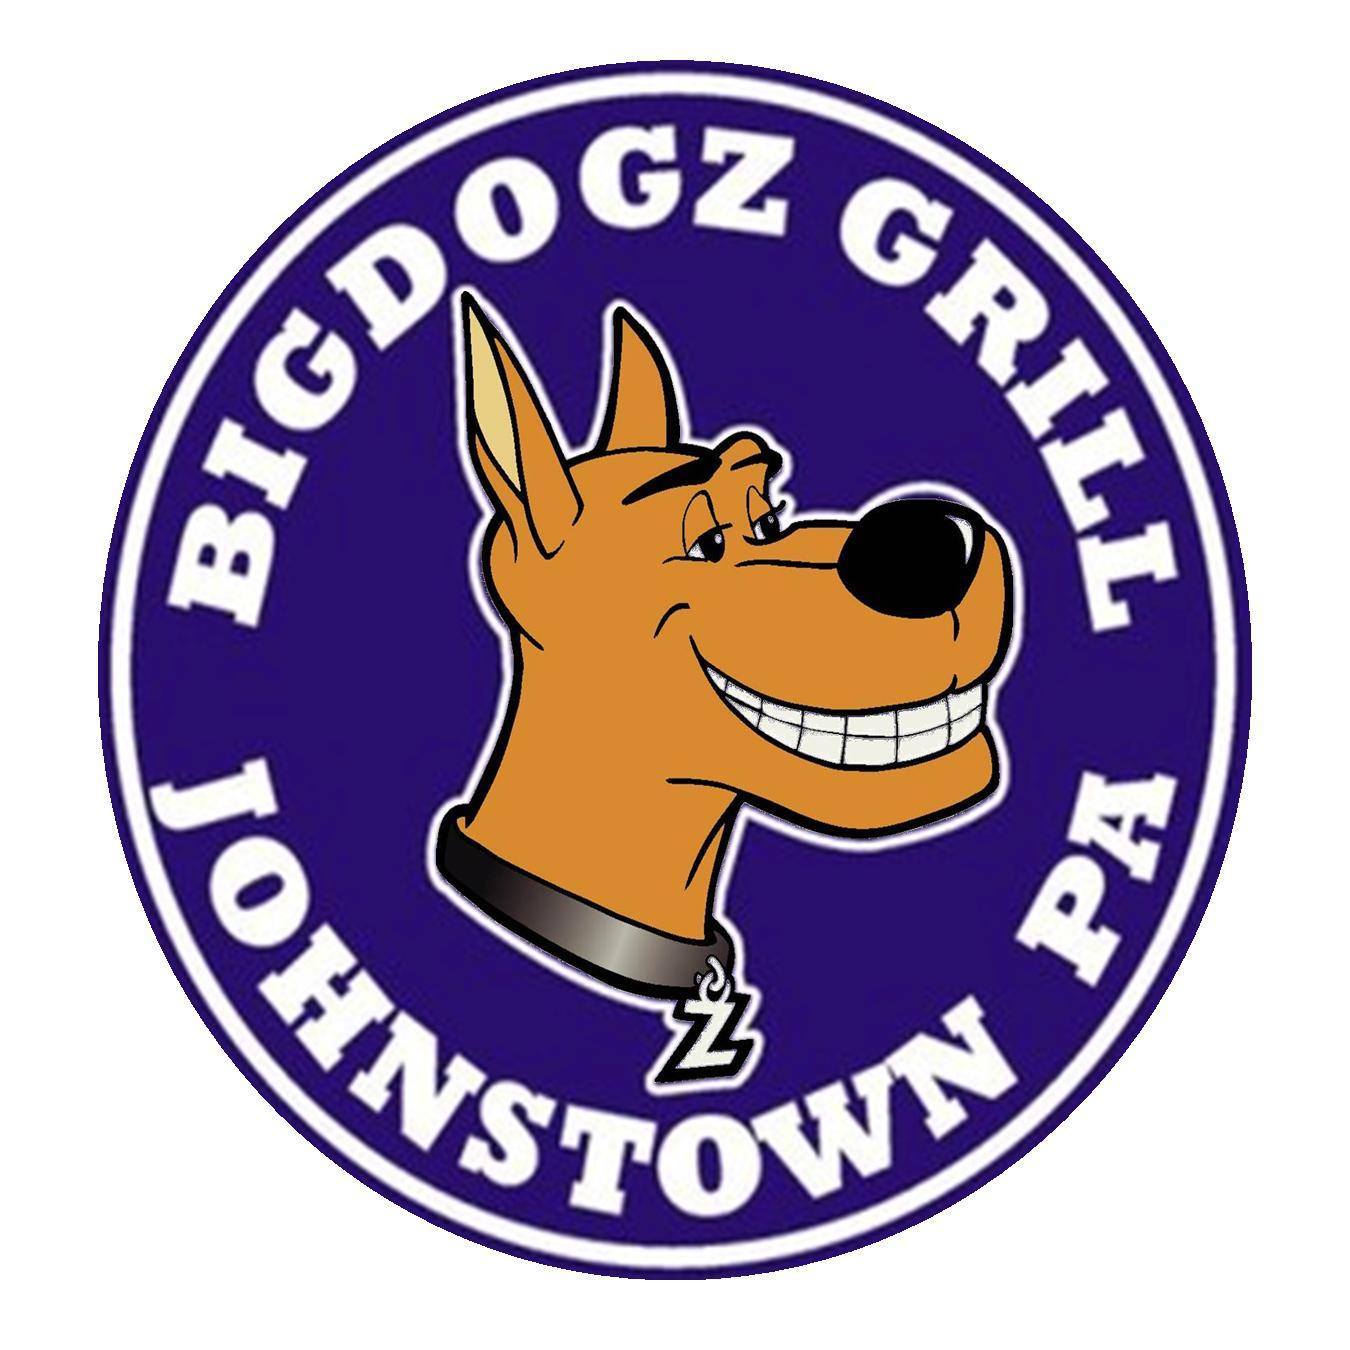 Big Dogz Grill, Johnstown PA, featured business of the Lorain/Stonycreek hiking trails